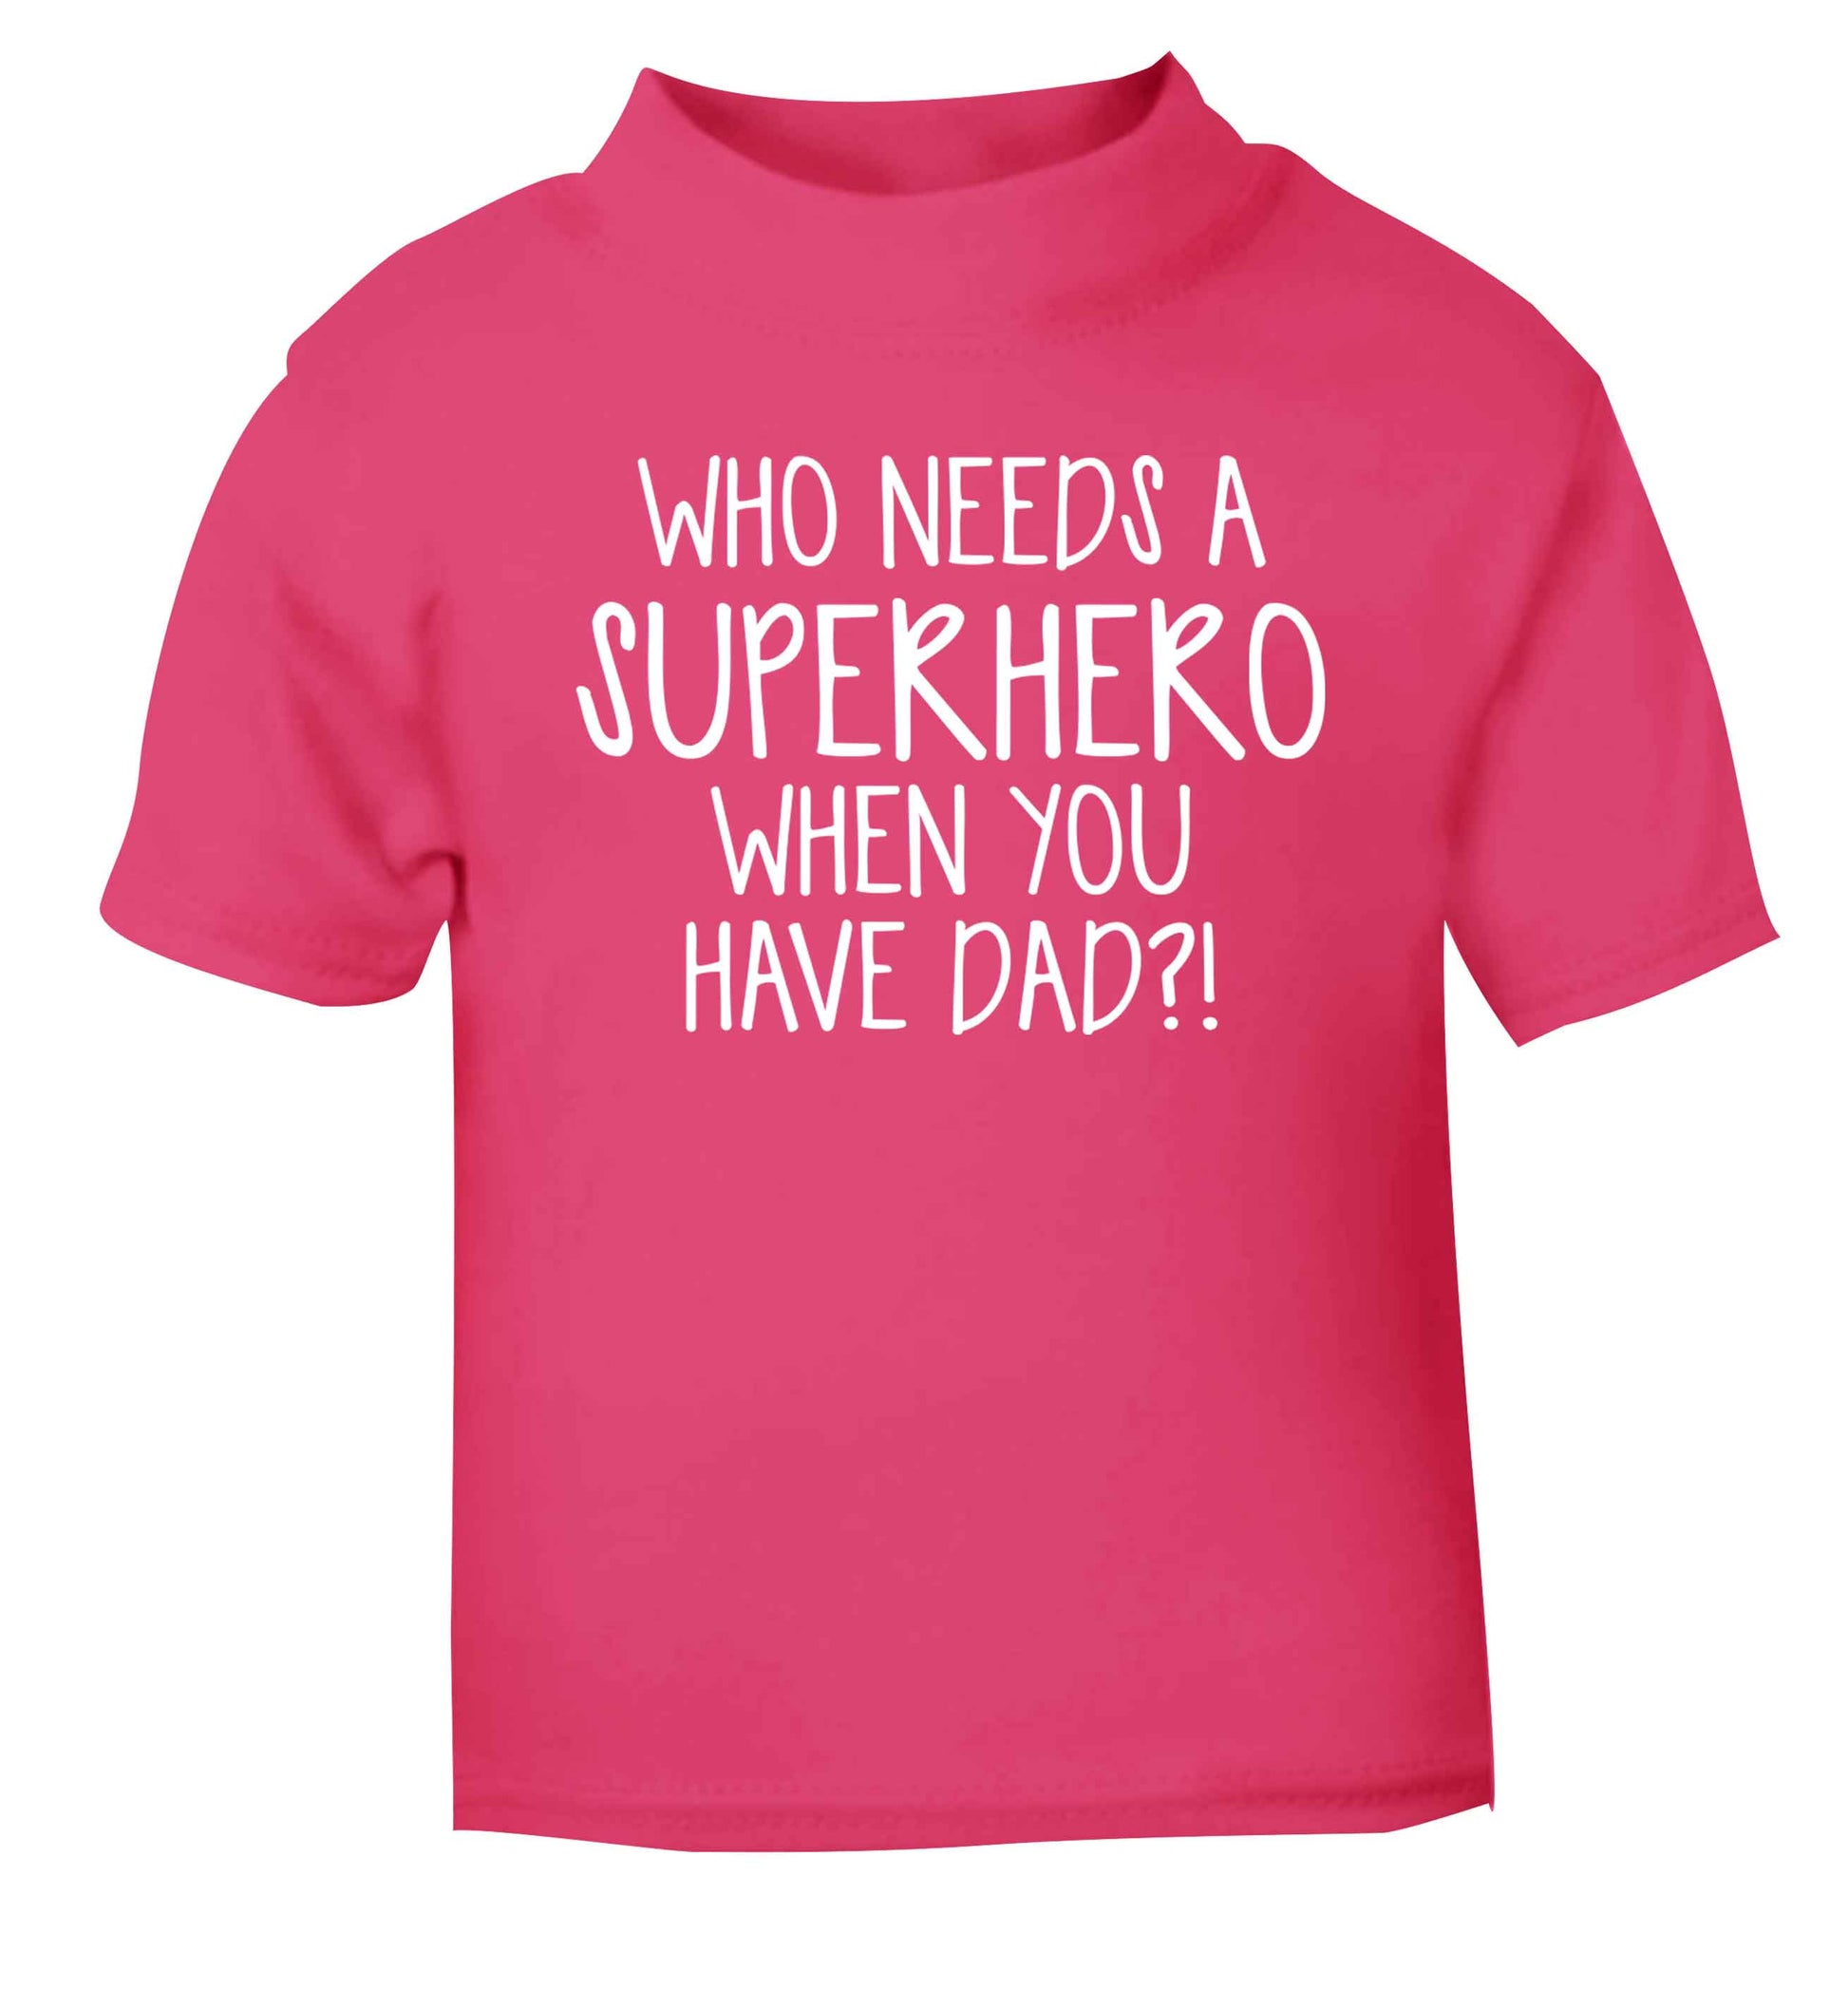 Who needs a superhero when you have dad! pink baby toddler Tshirt 2 Years